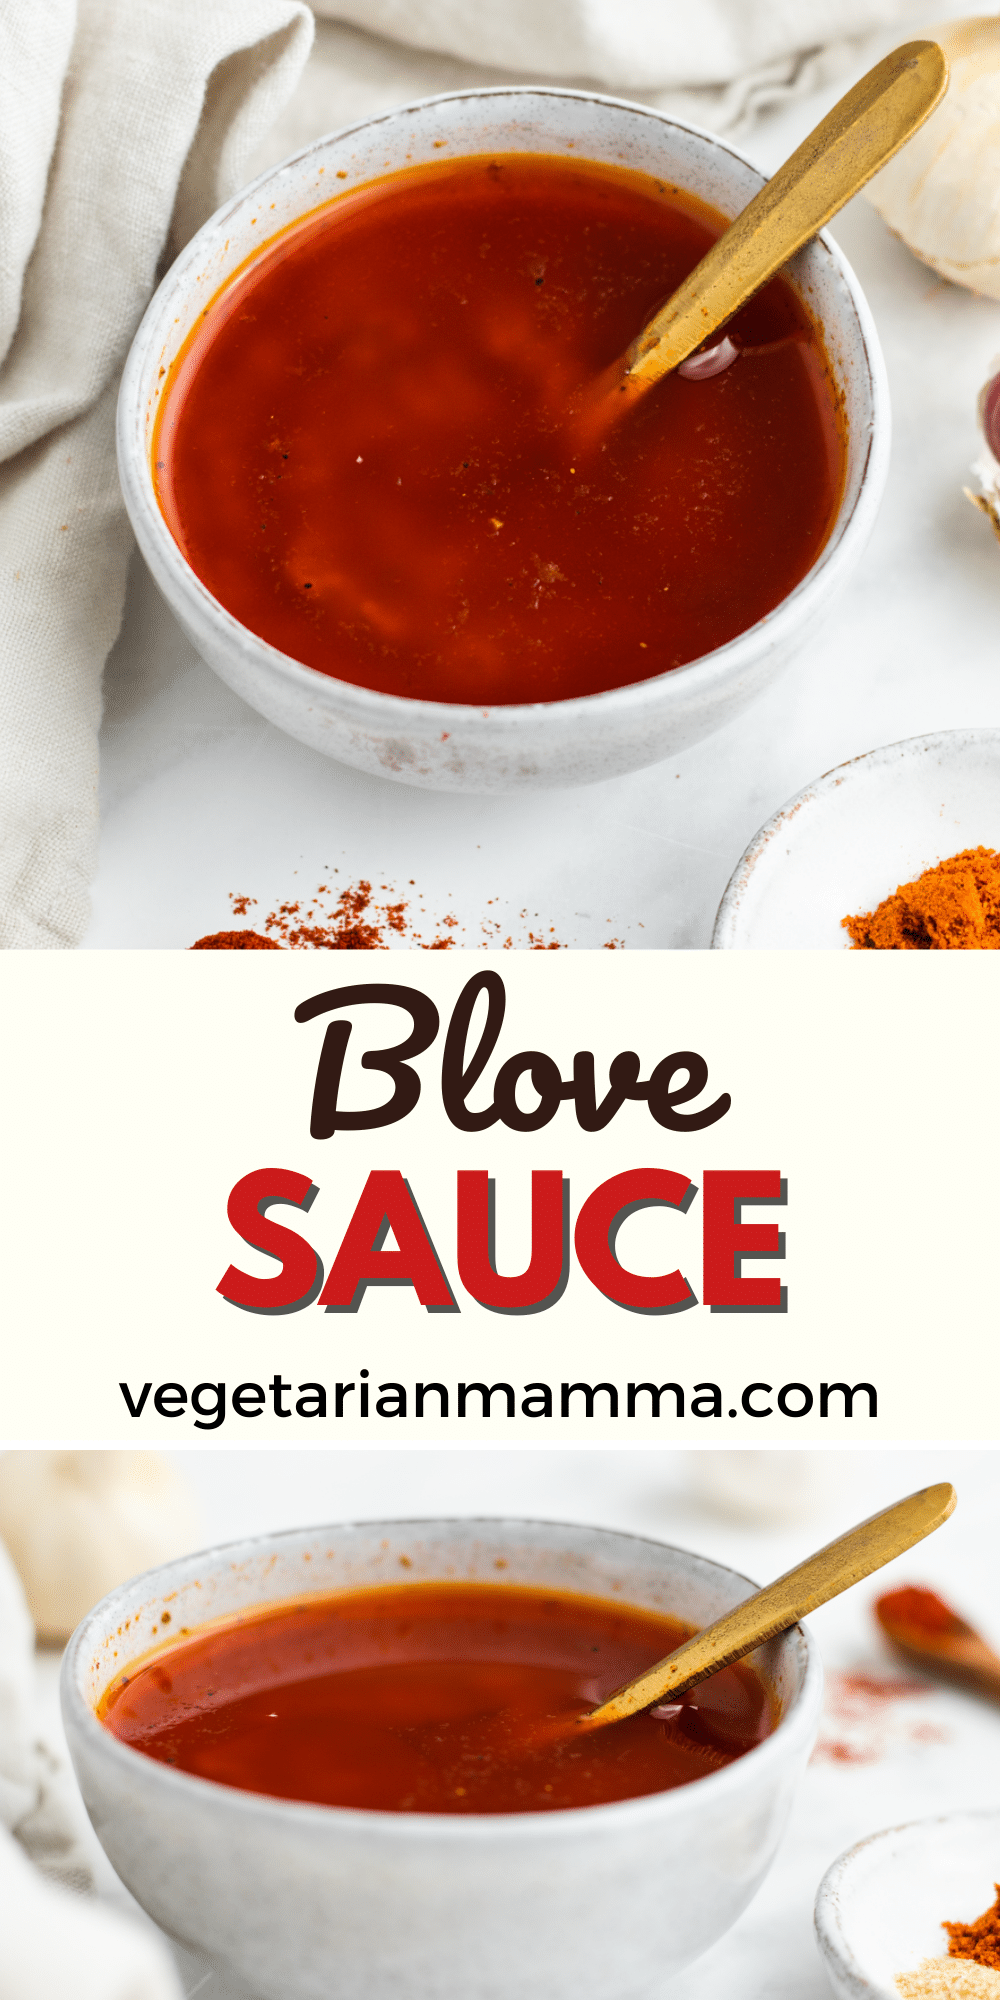 This Bloves Sauce Recipe is a special seasoning mix that is loaded with spices and flavor. Bloves Sauce comes together in less than 20 minutes and is freezer friendly.